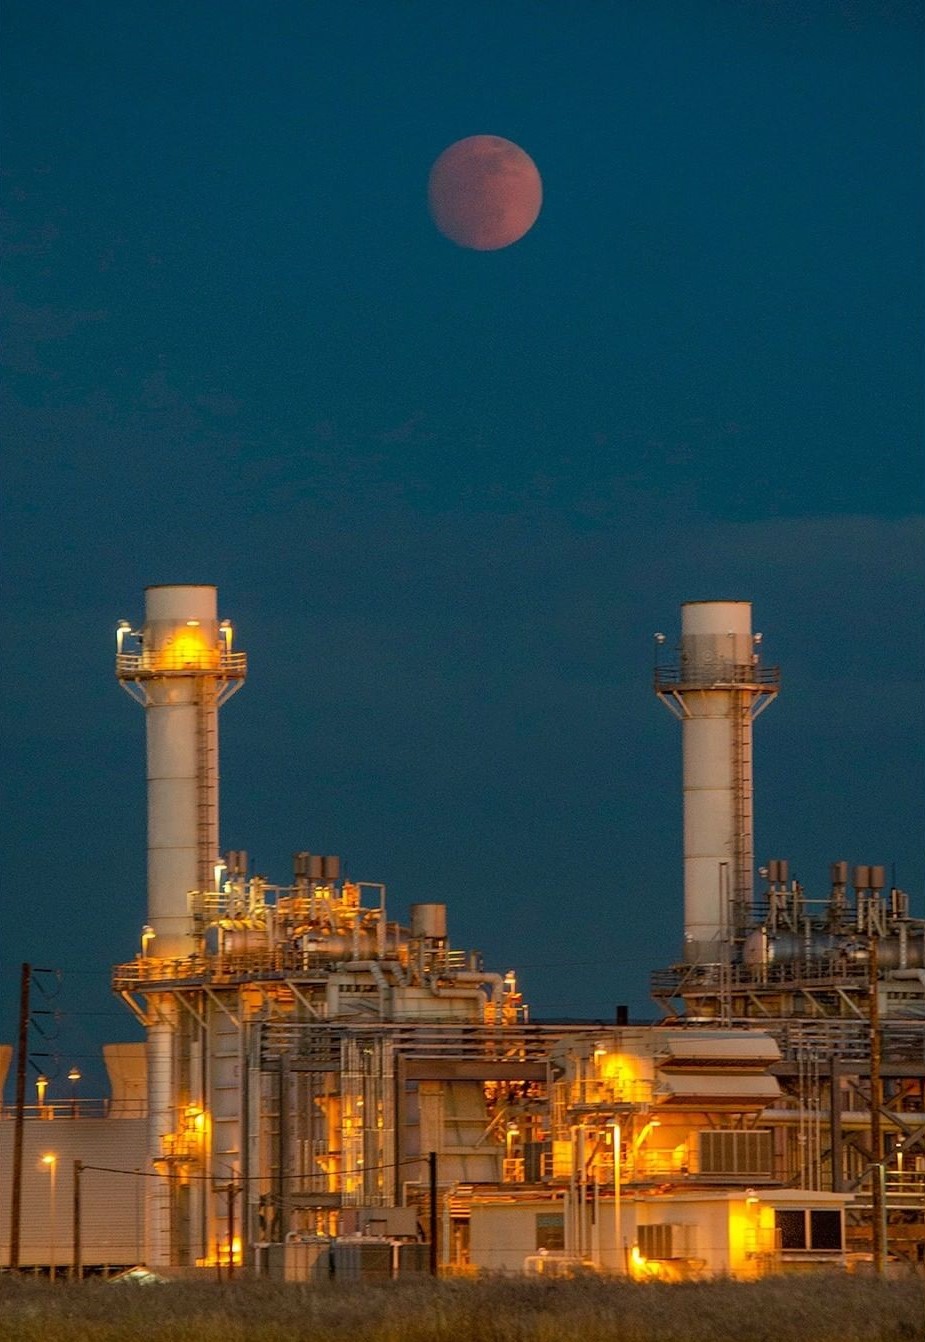 A blood moon hangs over an industrial complex in the night sky